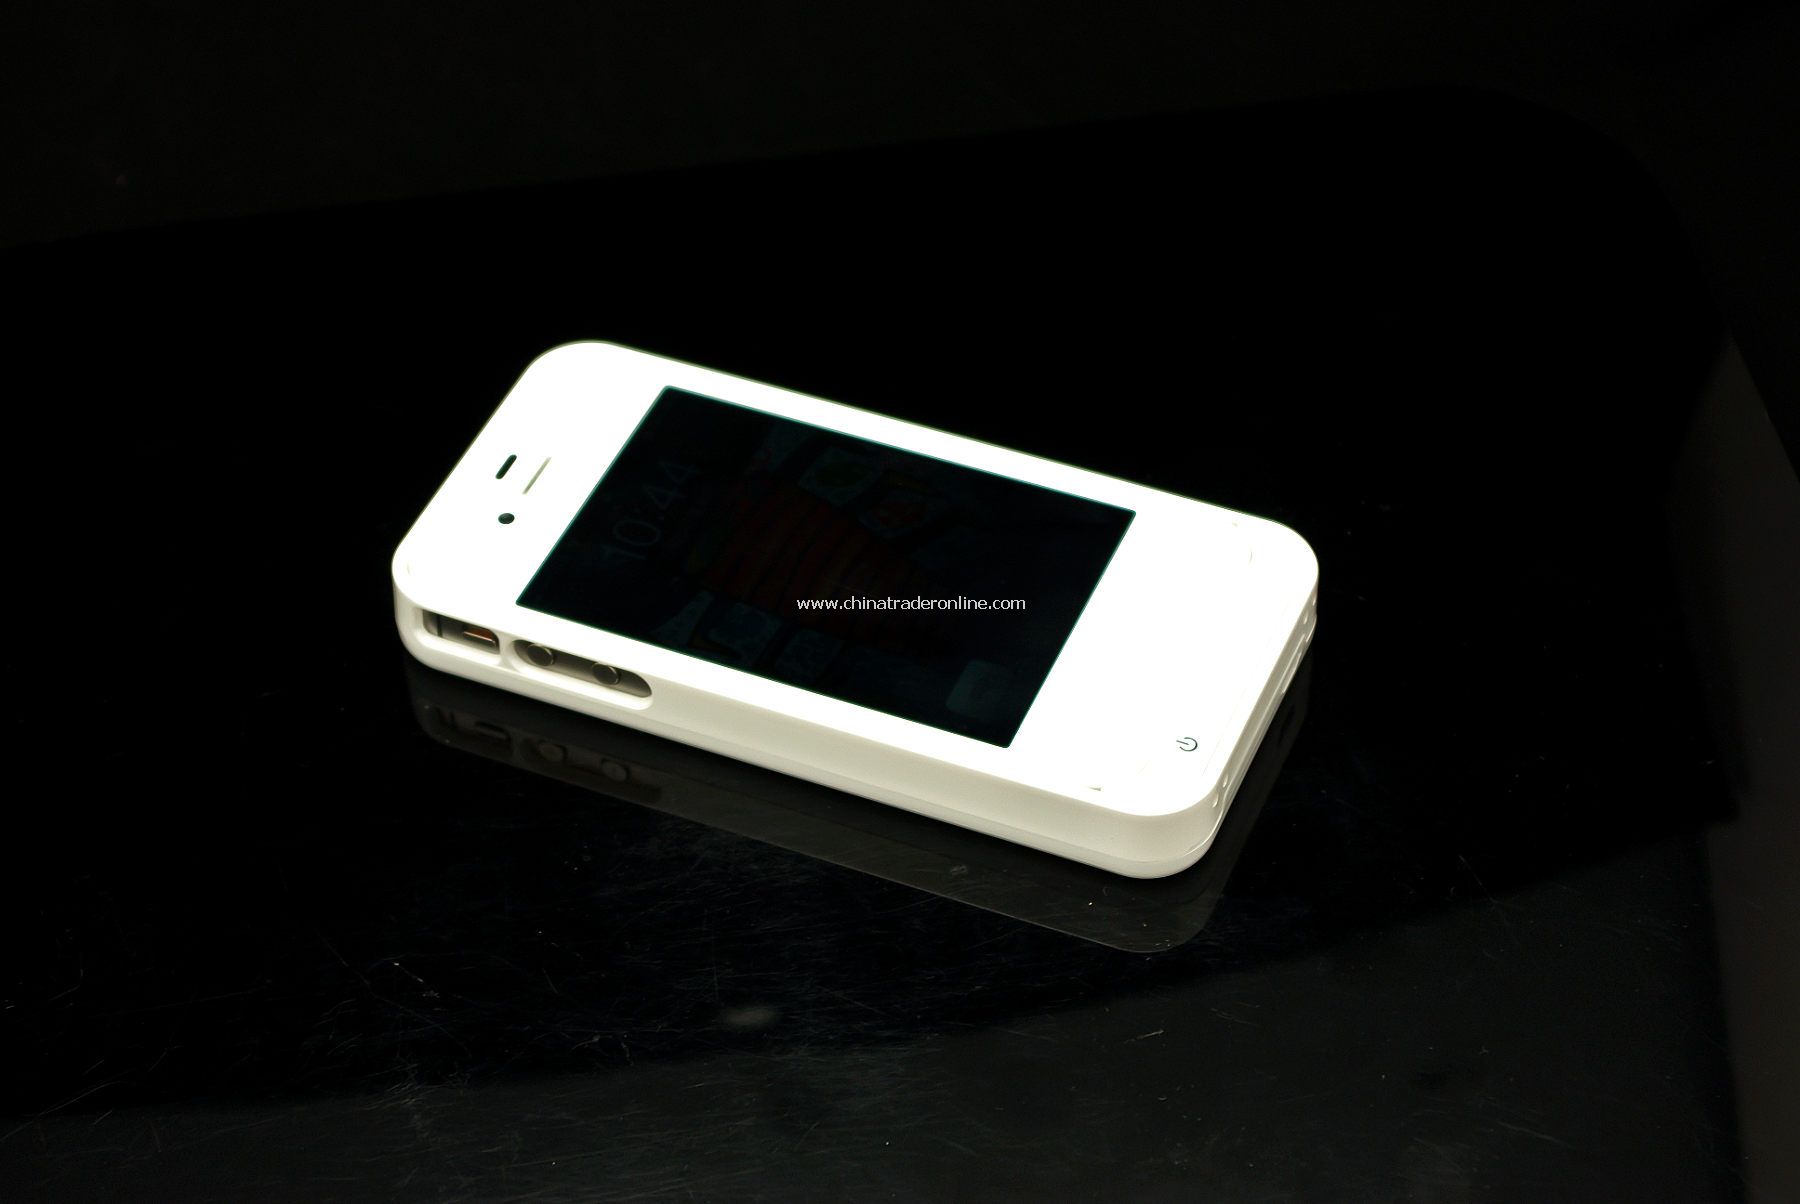 iPhone 4 backup case from China